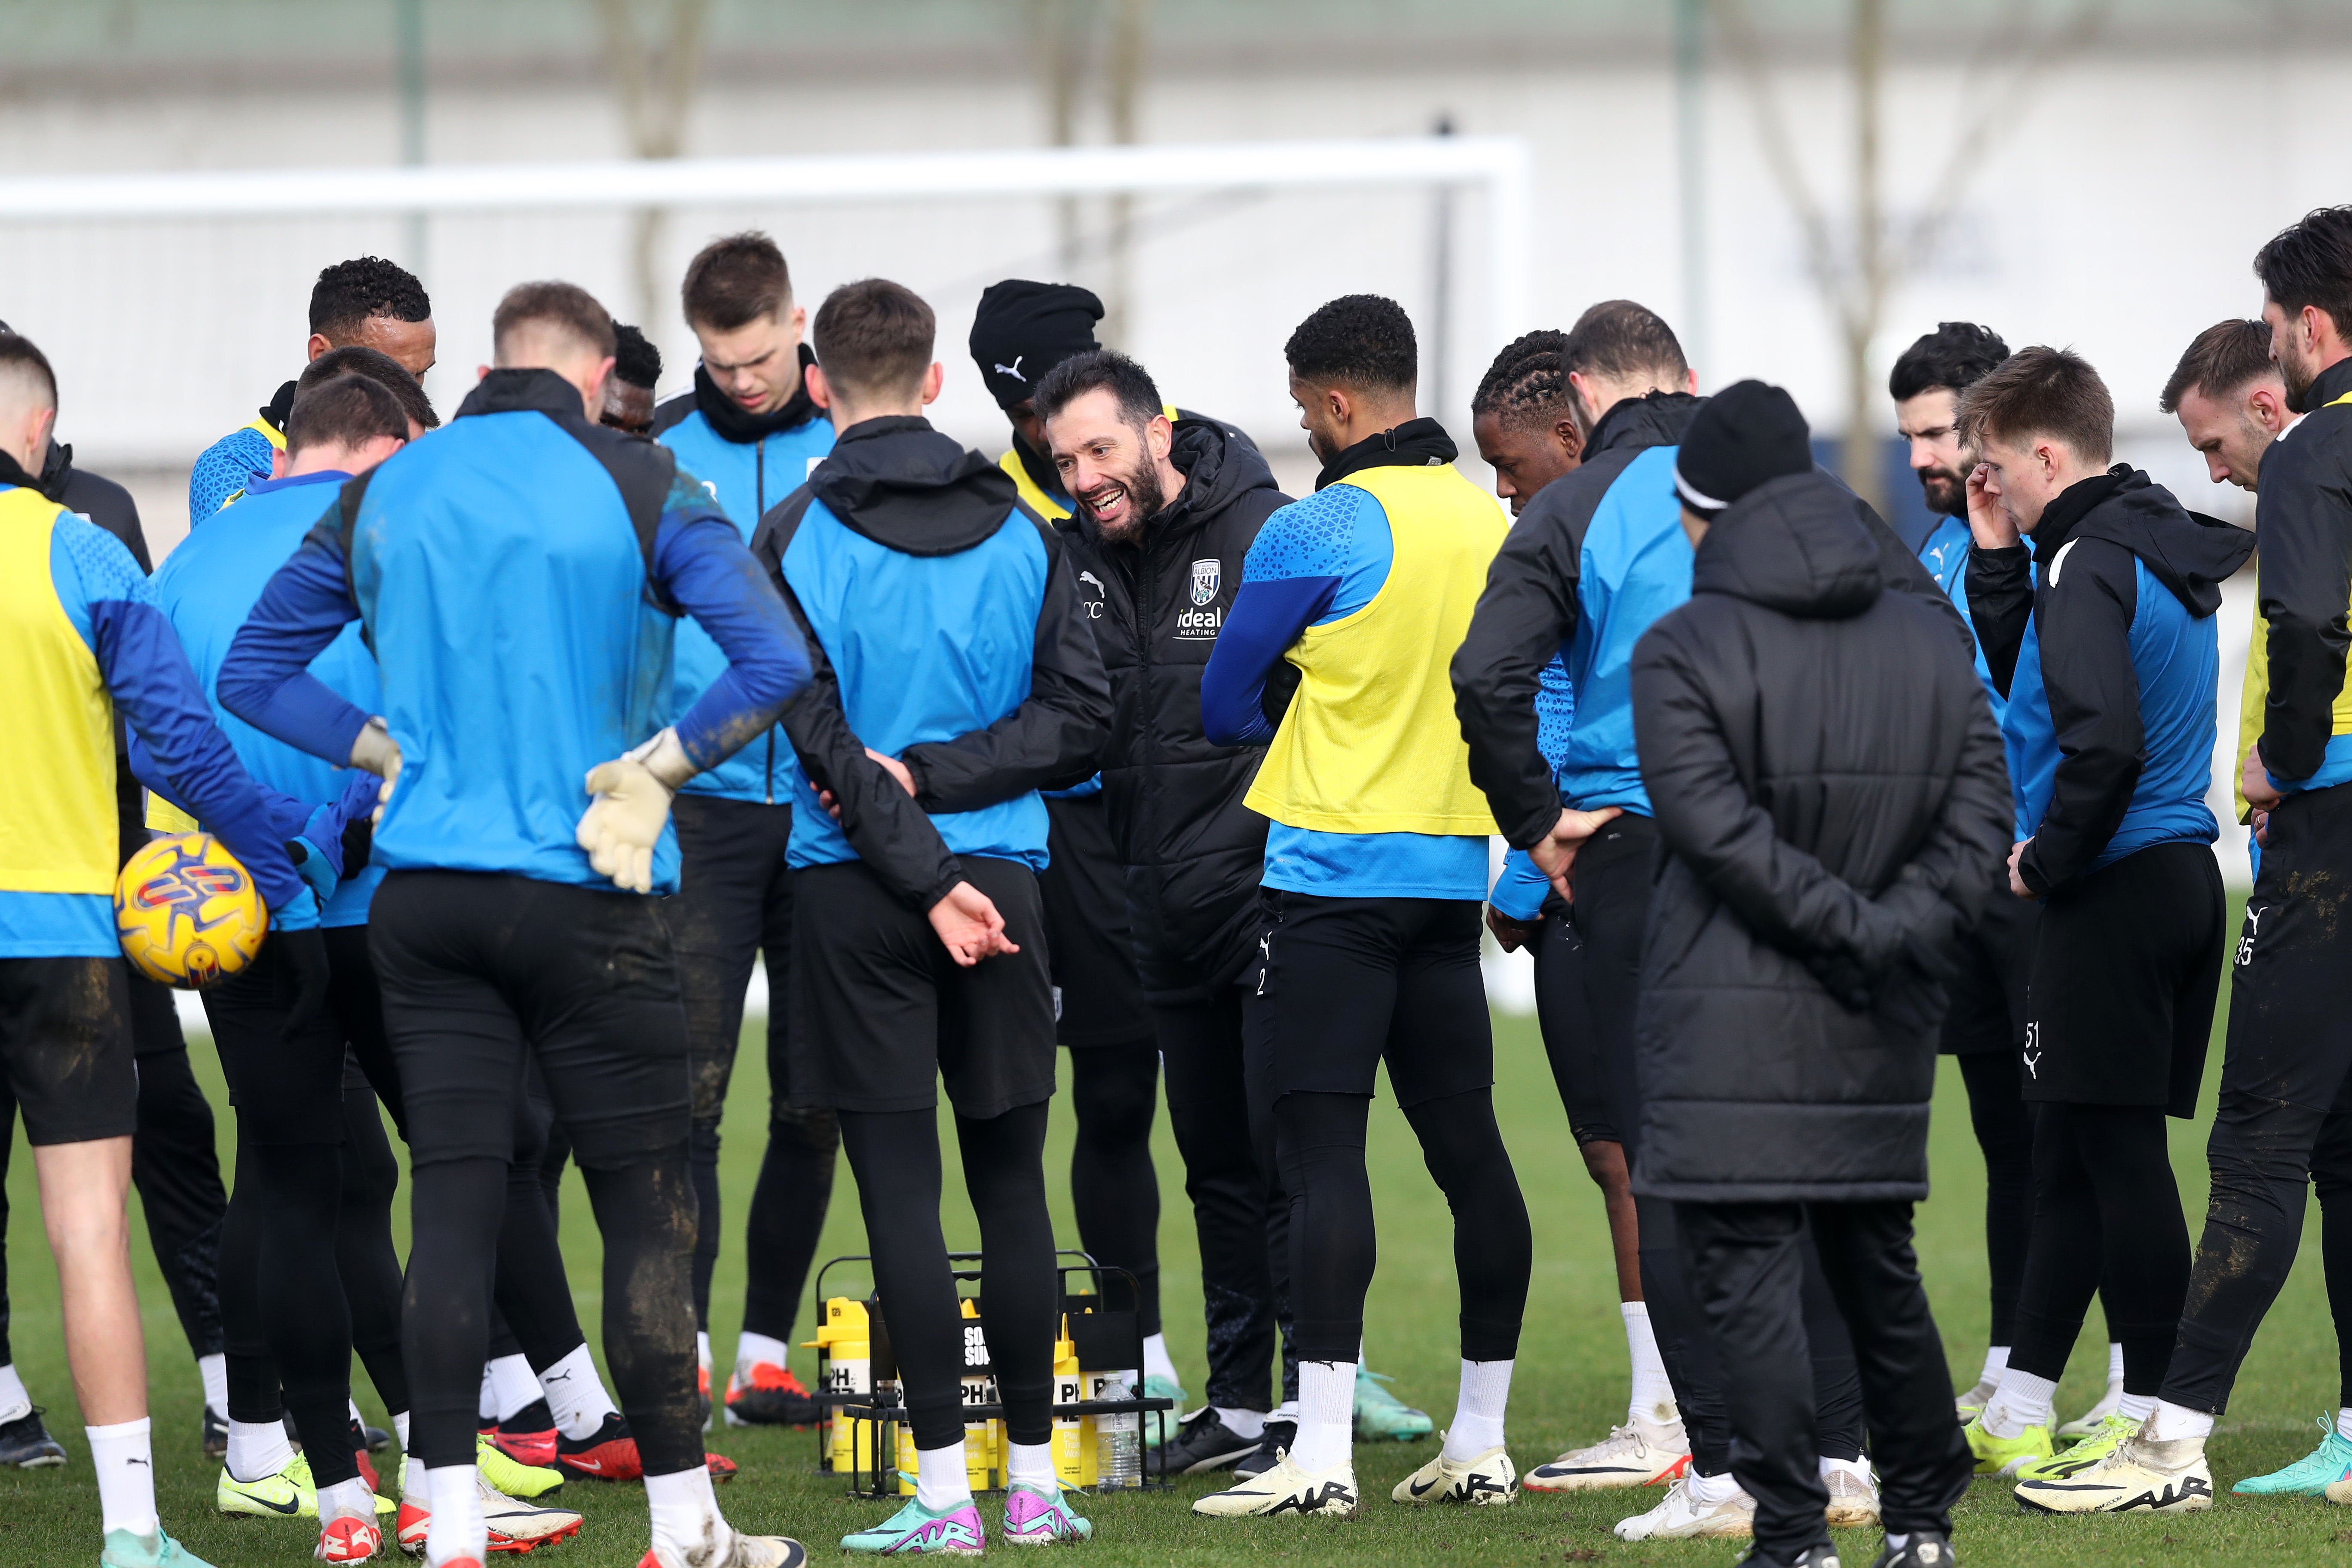 Carlos Corberán delivering instructions to several players during a training session